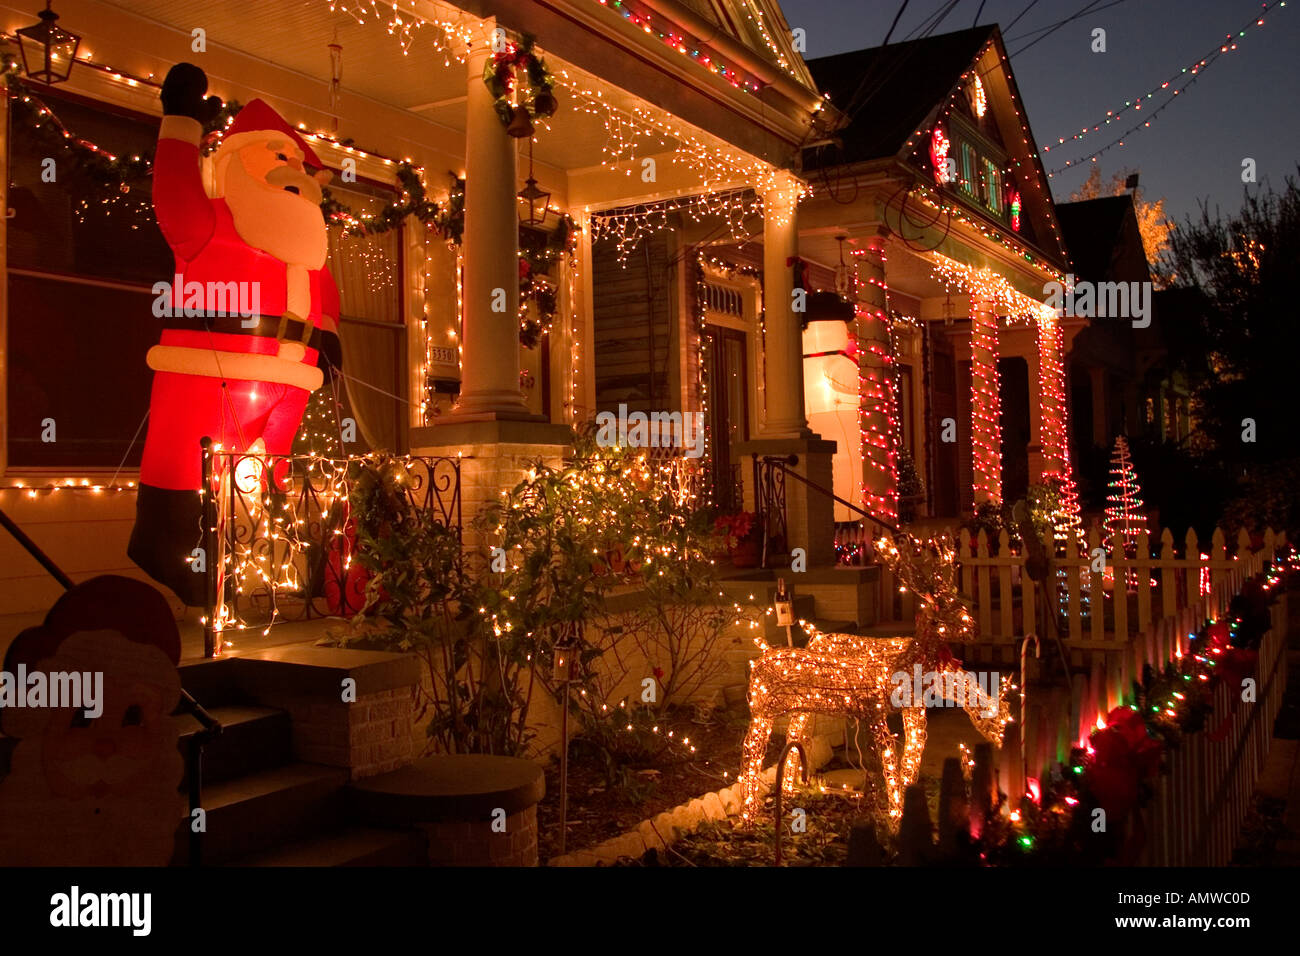 How to Decorate Home For Christmas in New Orleans Louisiana